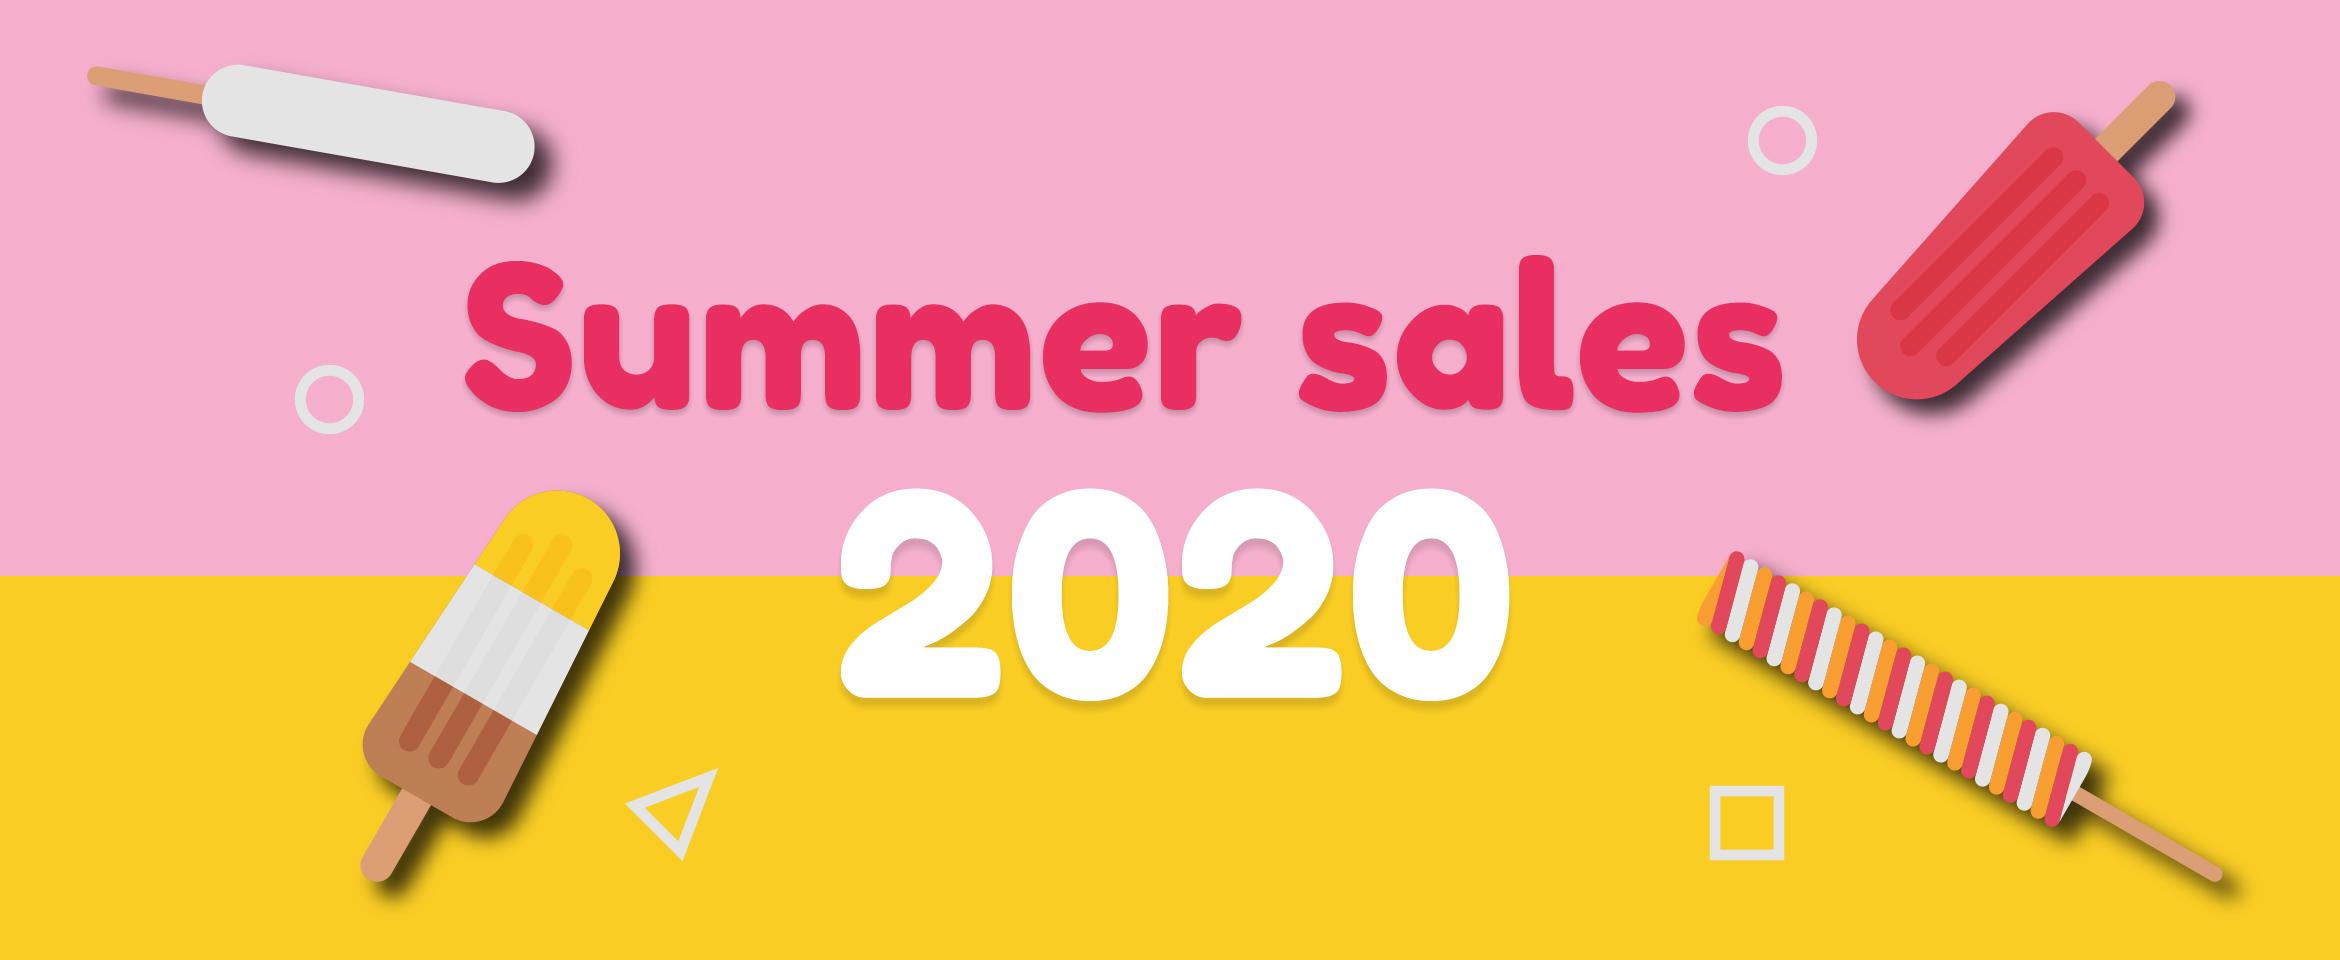 Summer Sales 2020: Our advices to update your assets